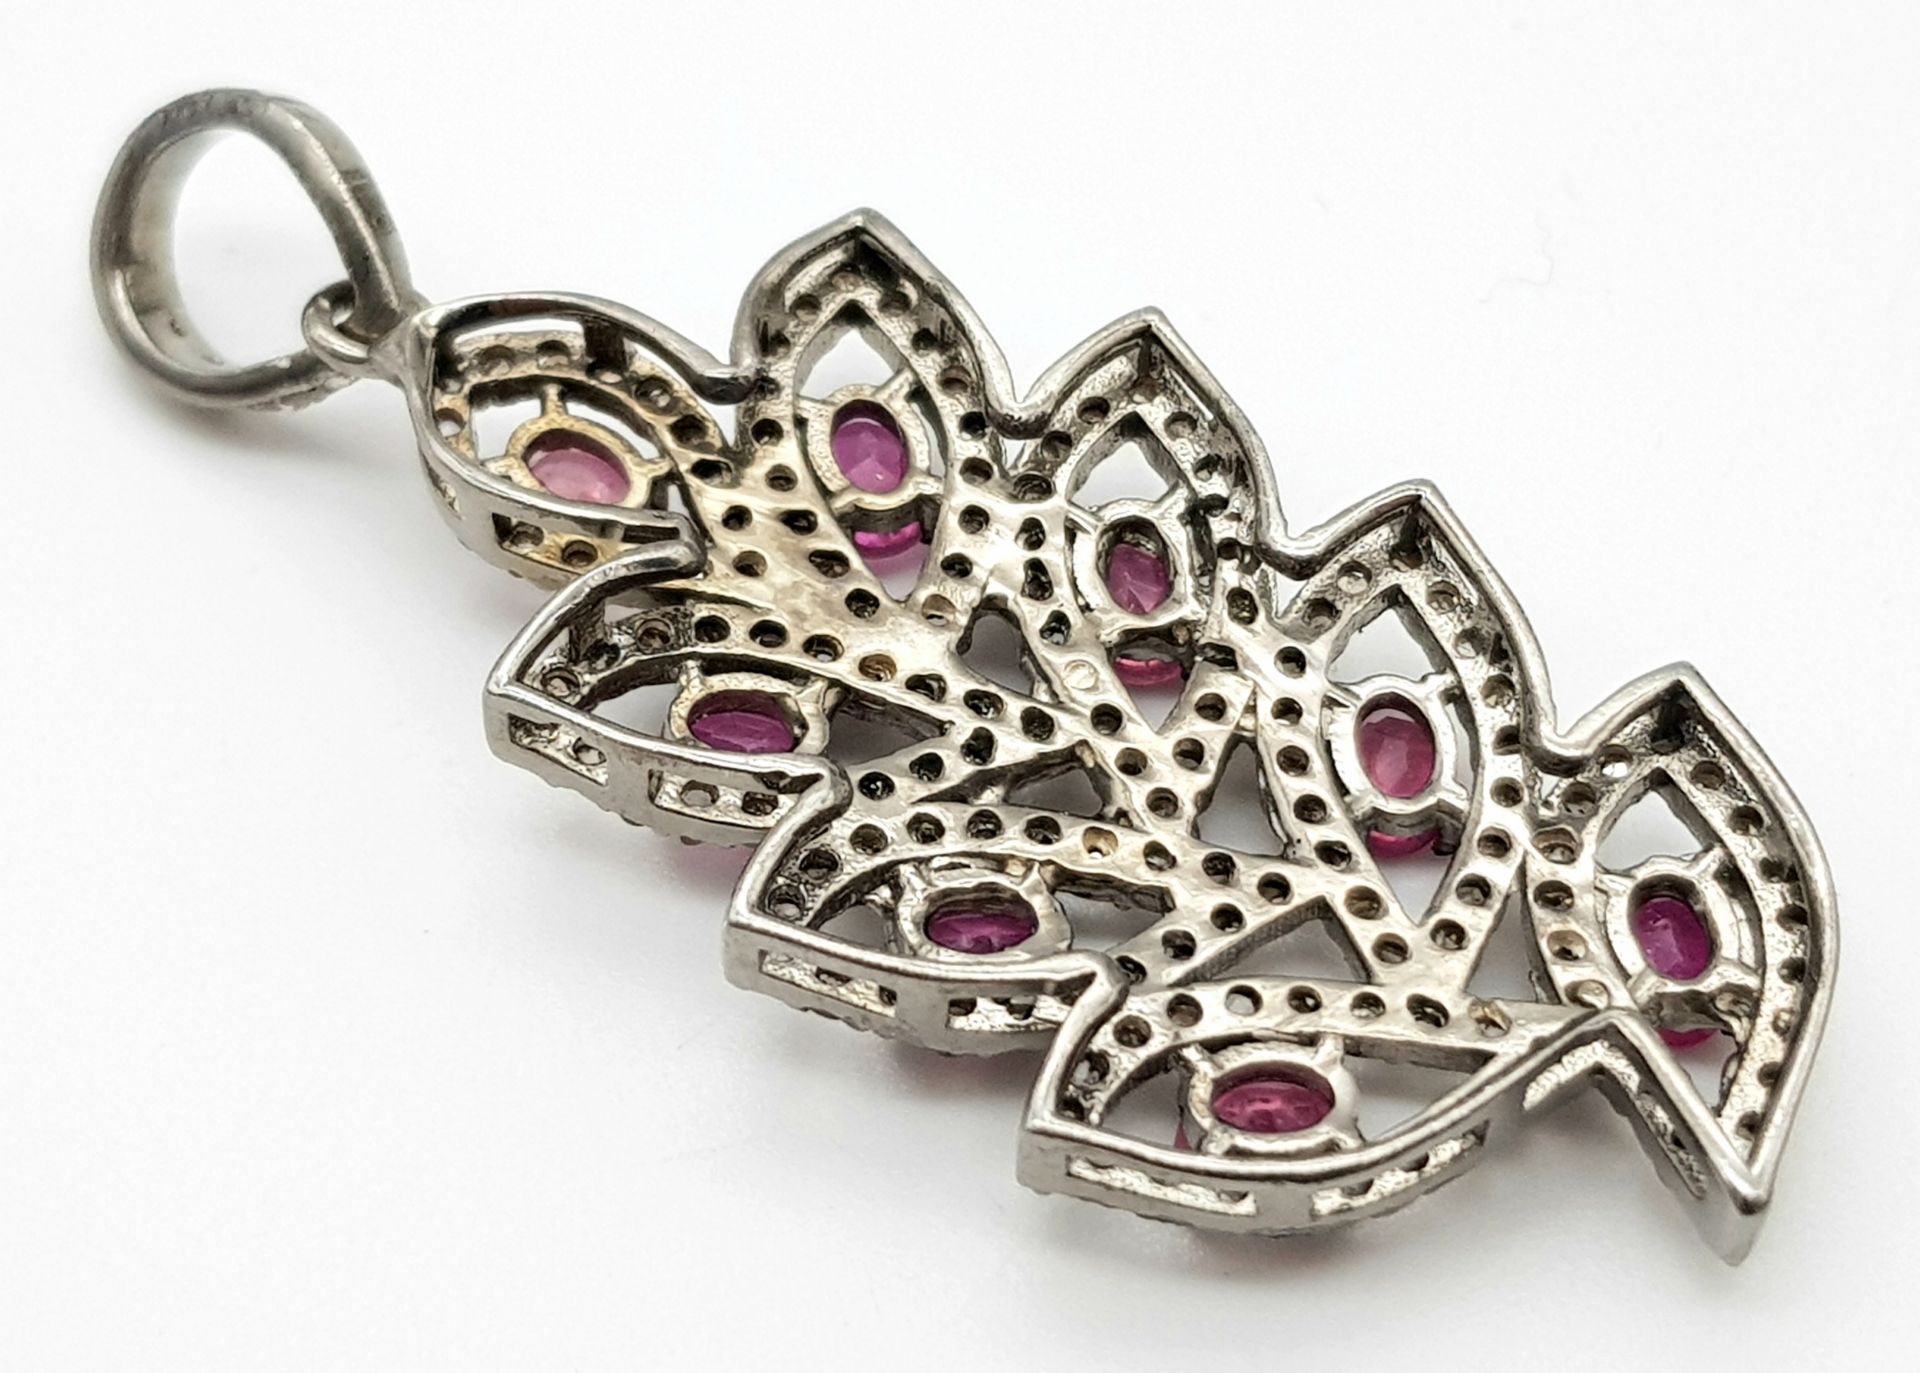 A Beautiful Ruby and Diamond Decorative Floral Pendant - with 1.90ctw of Rubies and 1.60ctw of - Image 3 of 5